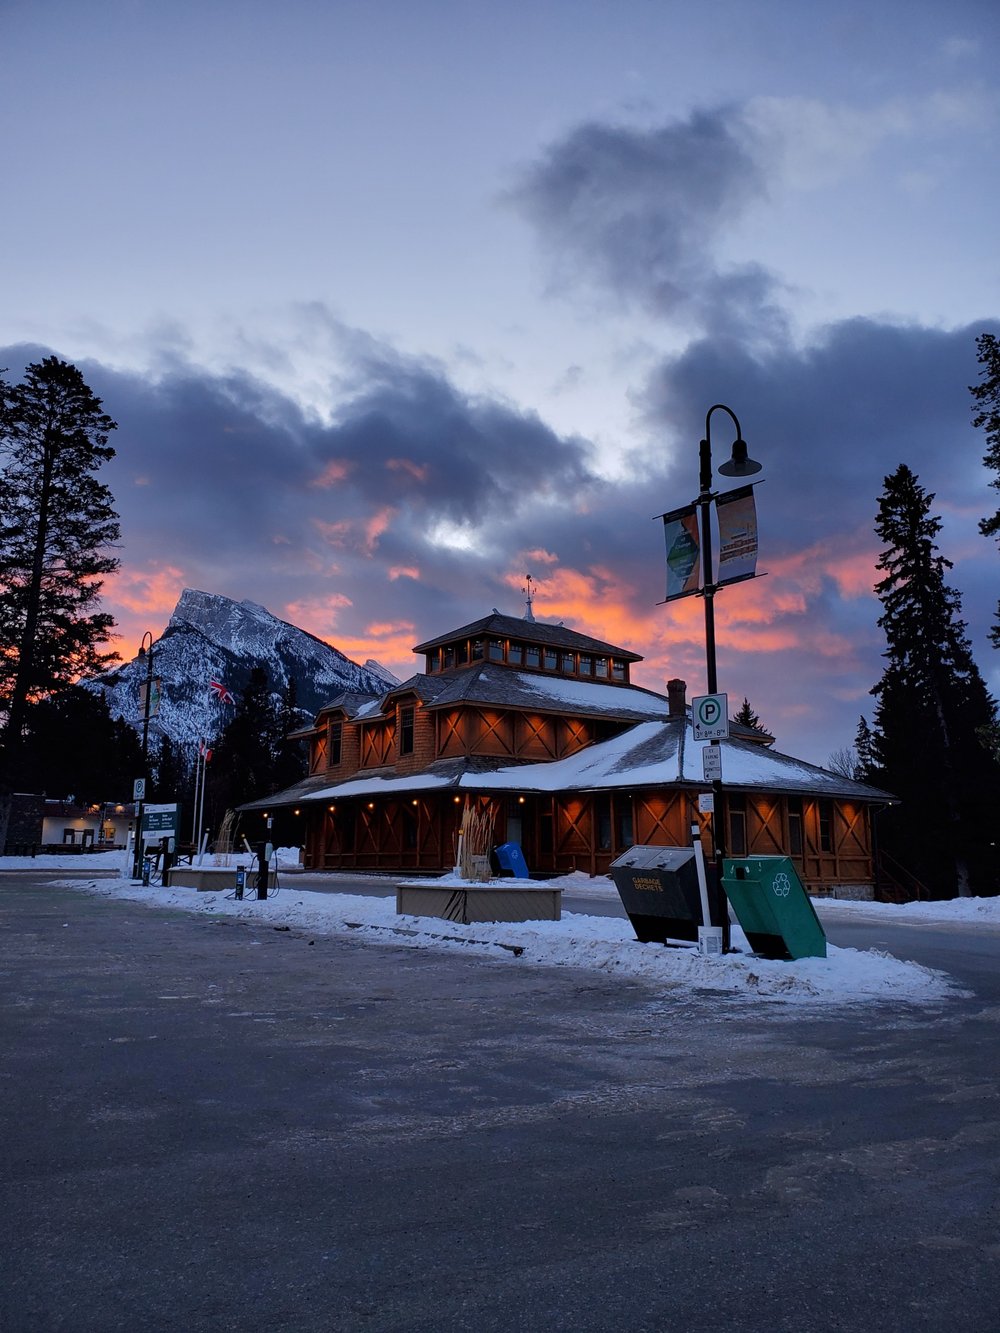 Sunset at Banff Park Museum, Rundle in background